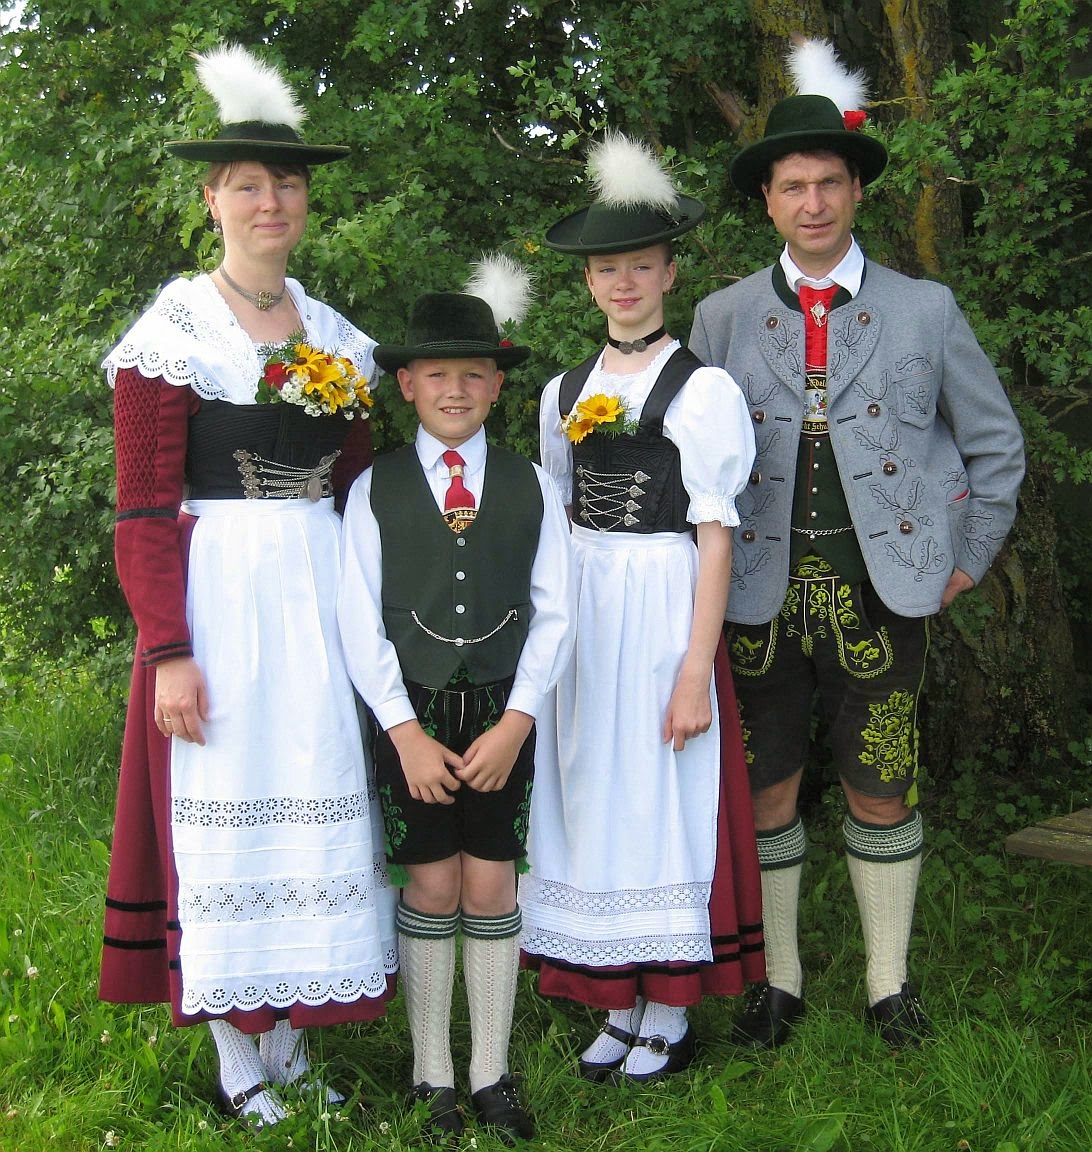 dresses from germany